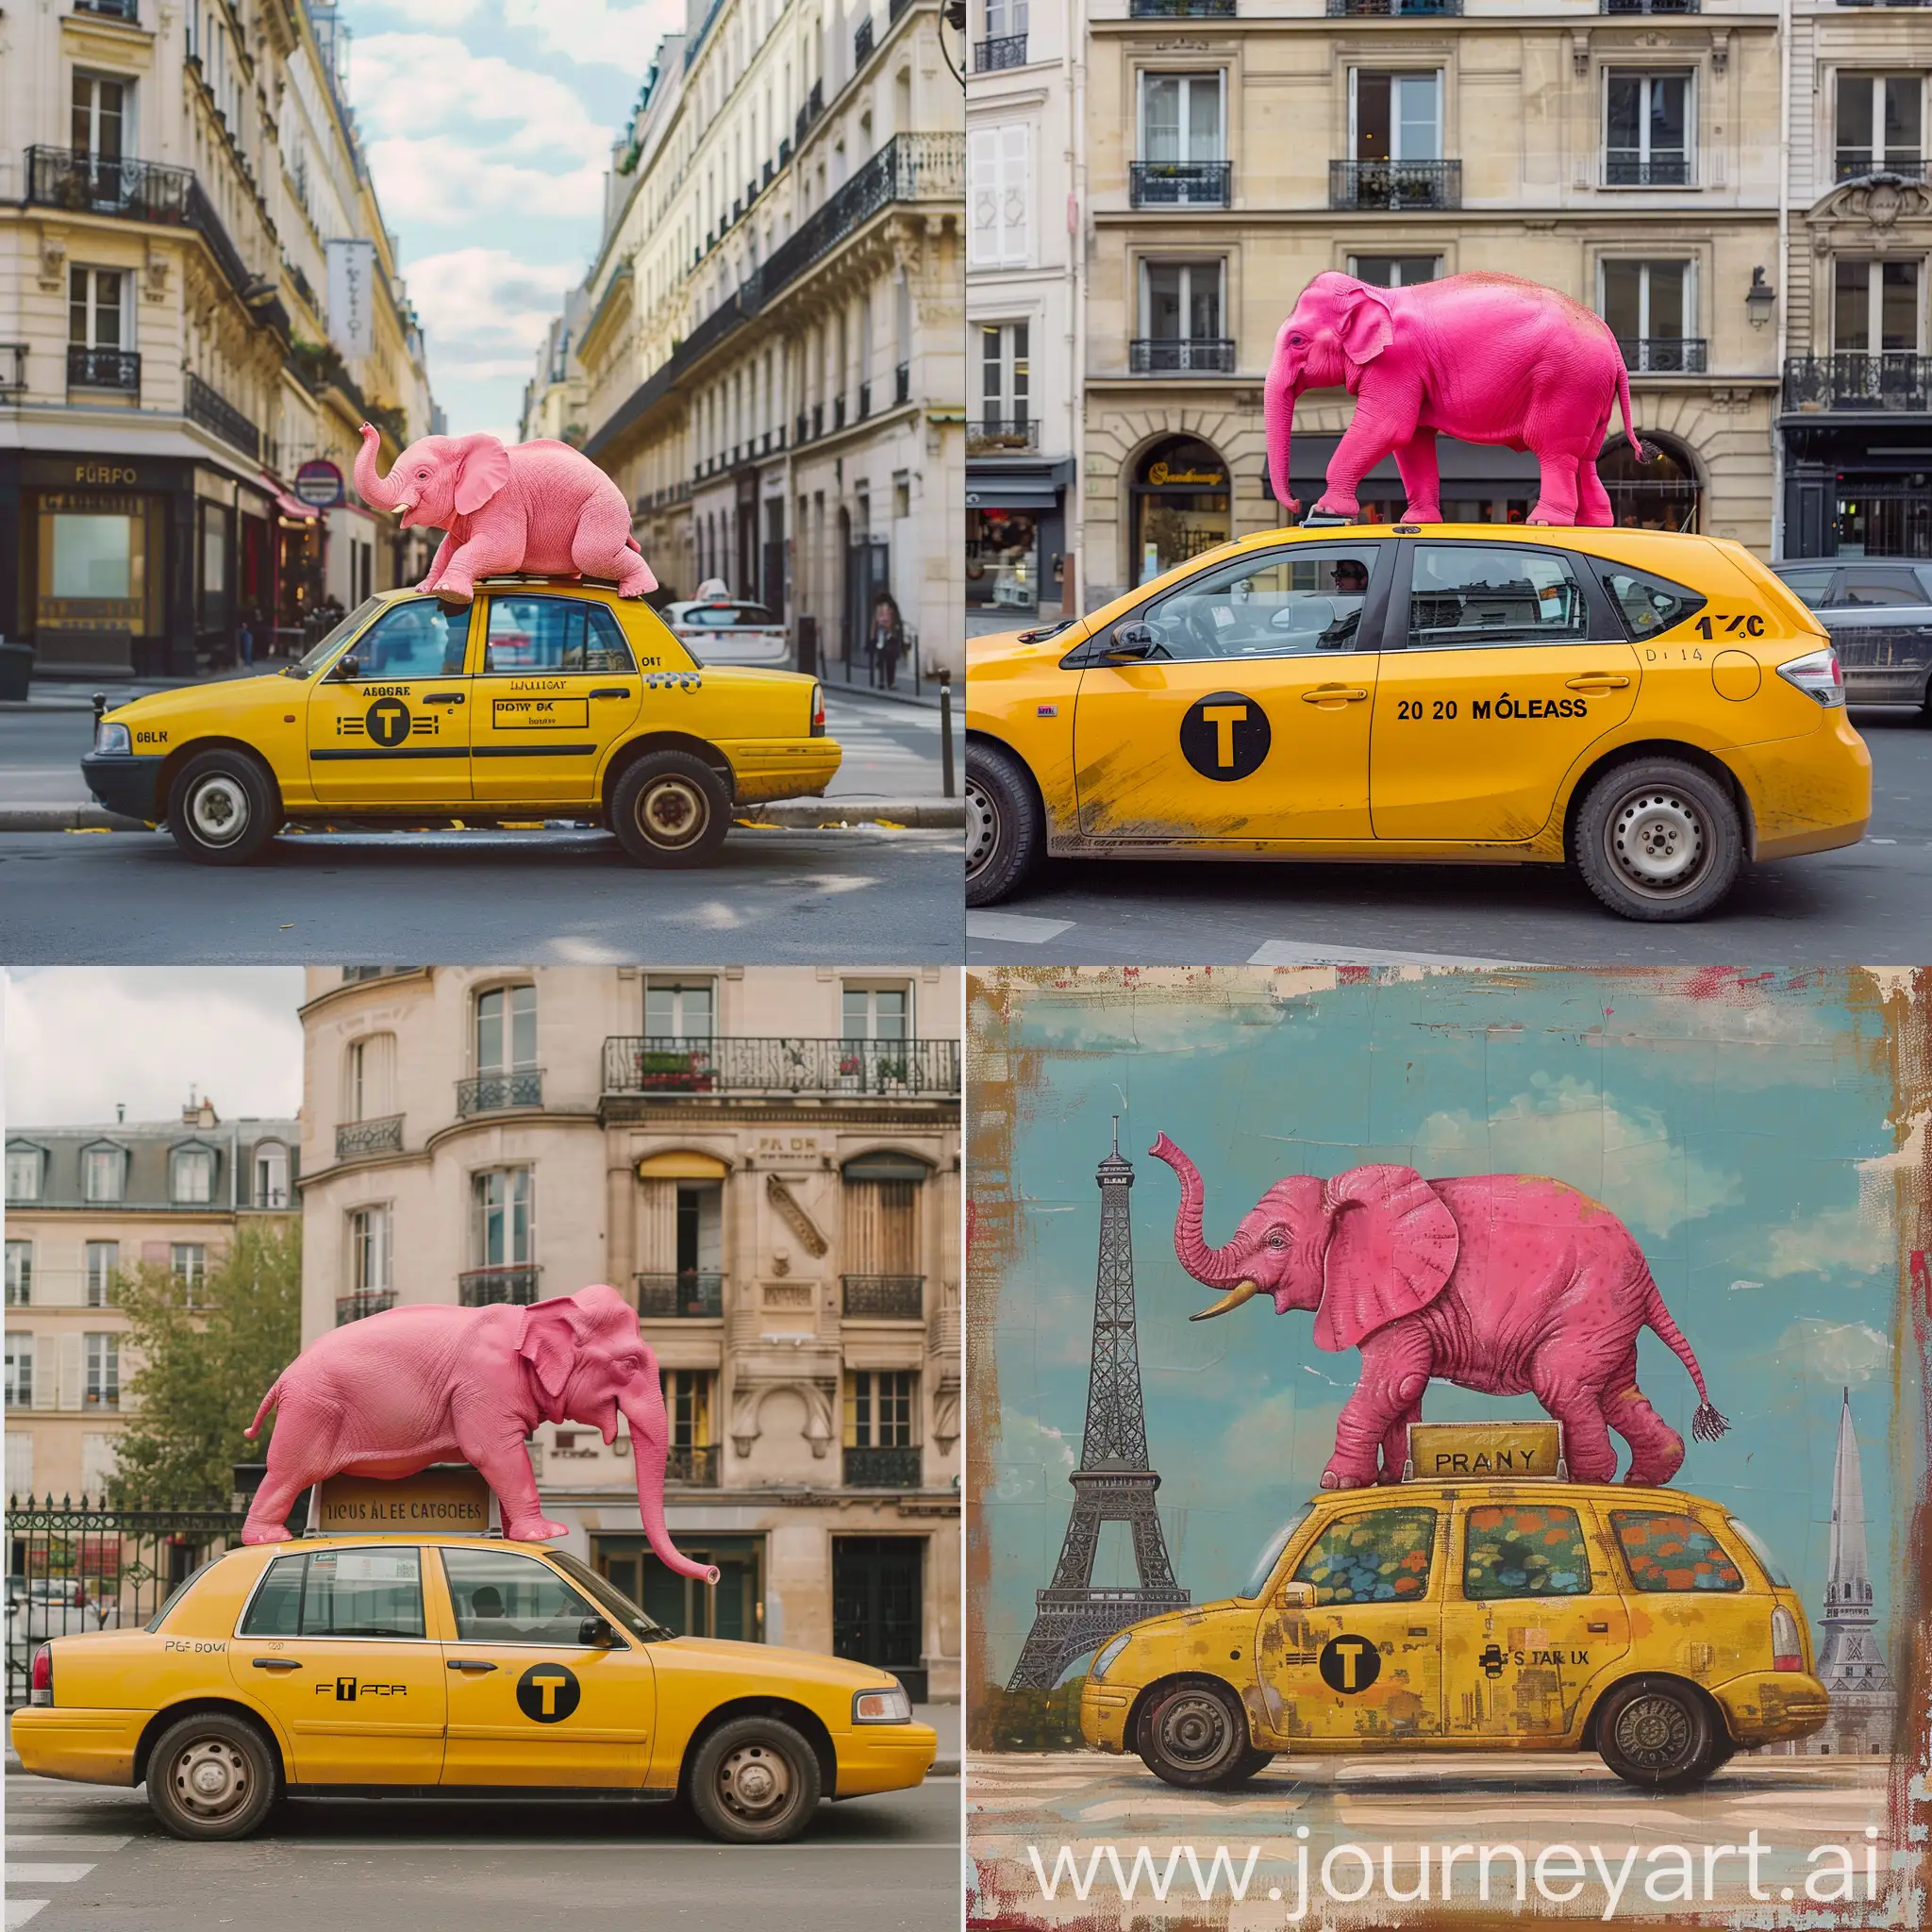 Pink-Elephant-on-Yellow-Taxi-in-Paris